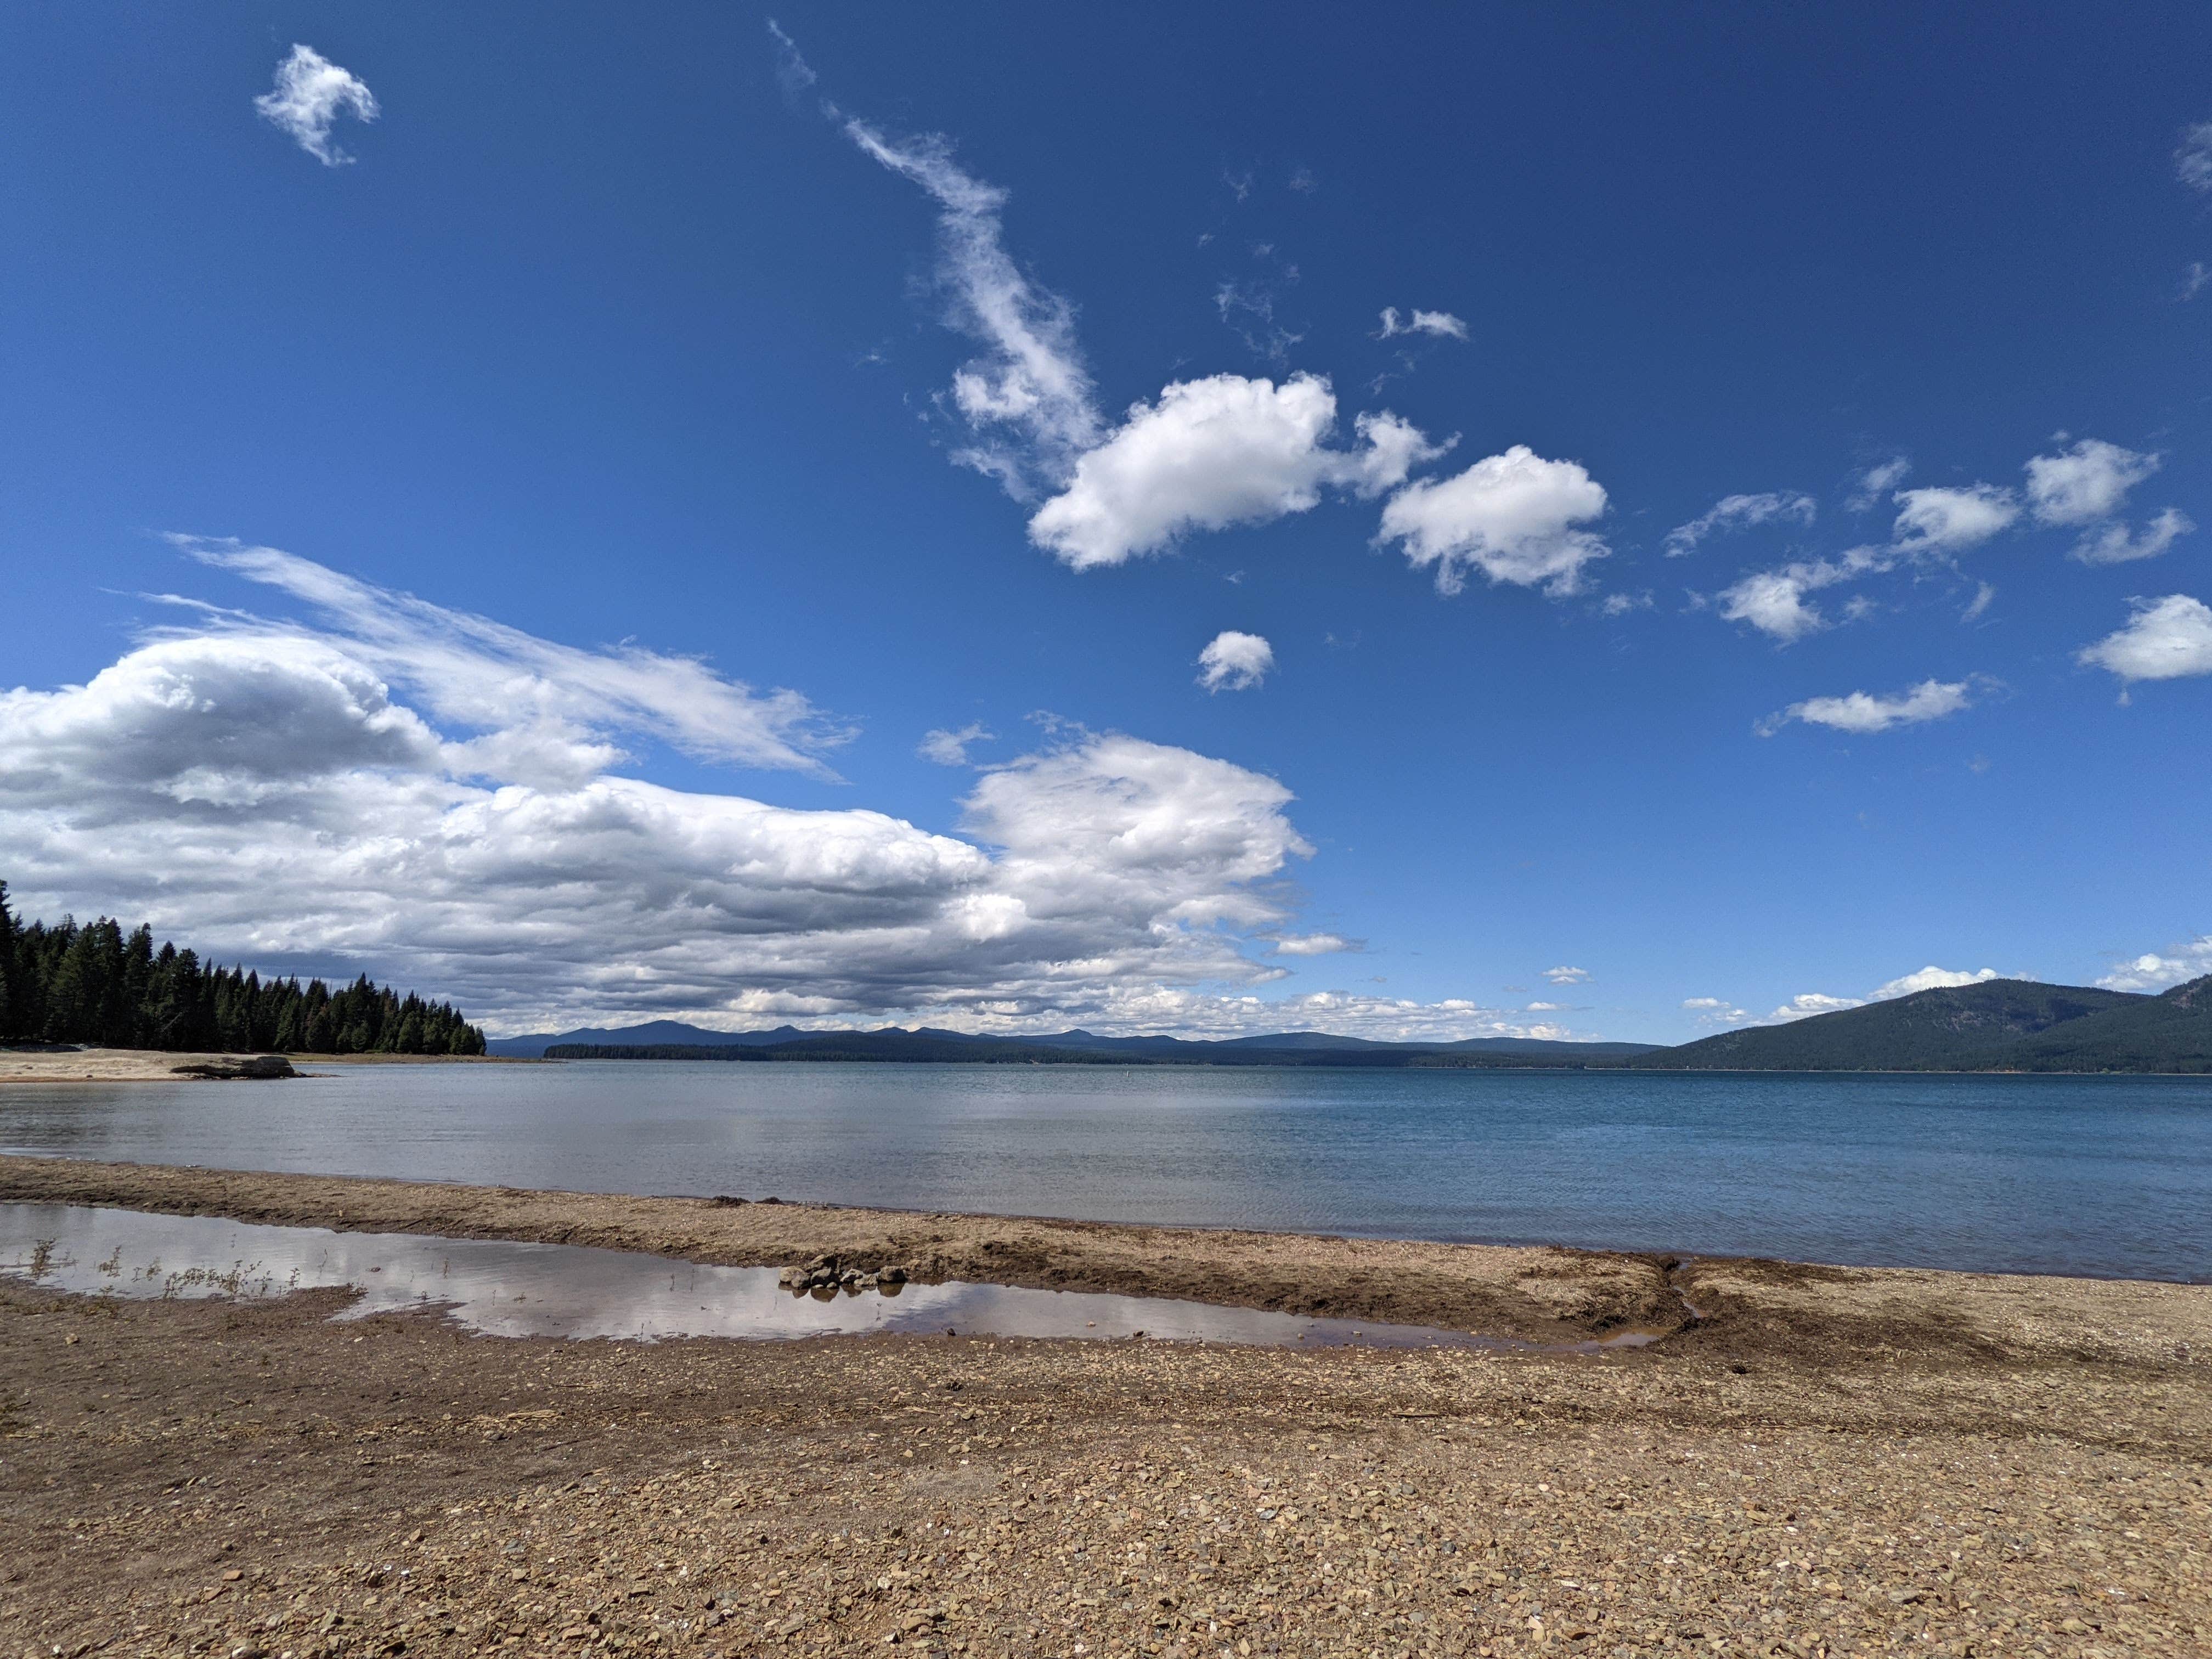 Camper submitted image from Rocky Point Campground - Lake Almanor - 5